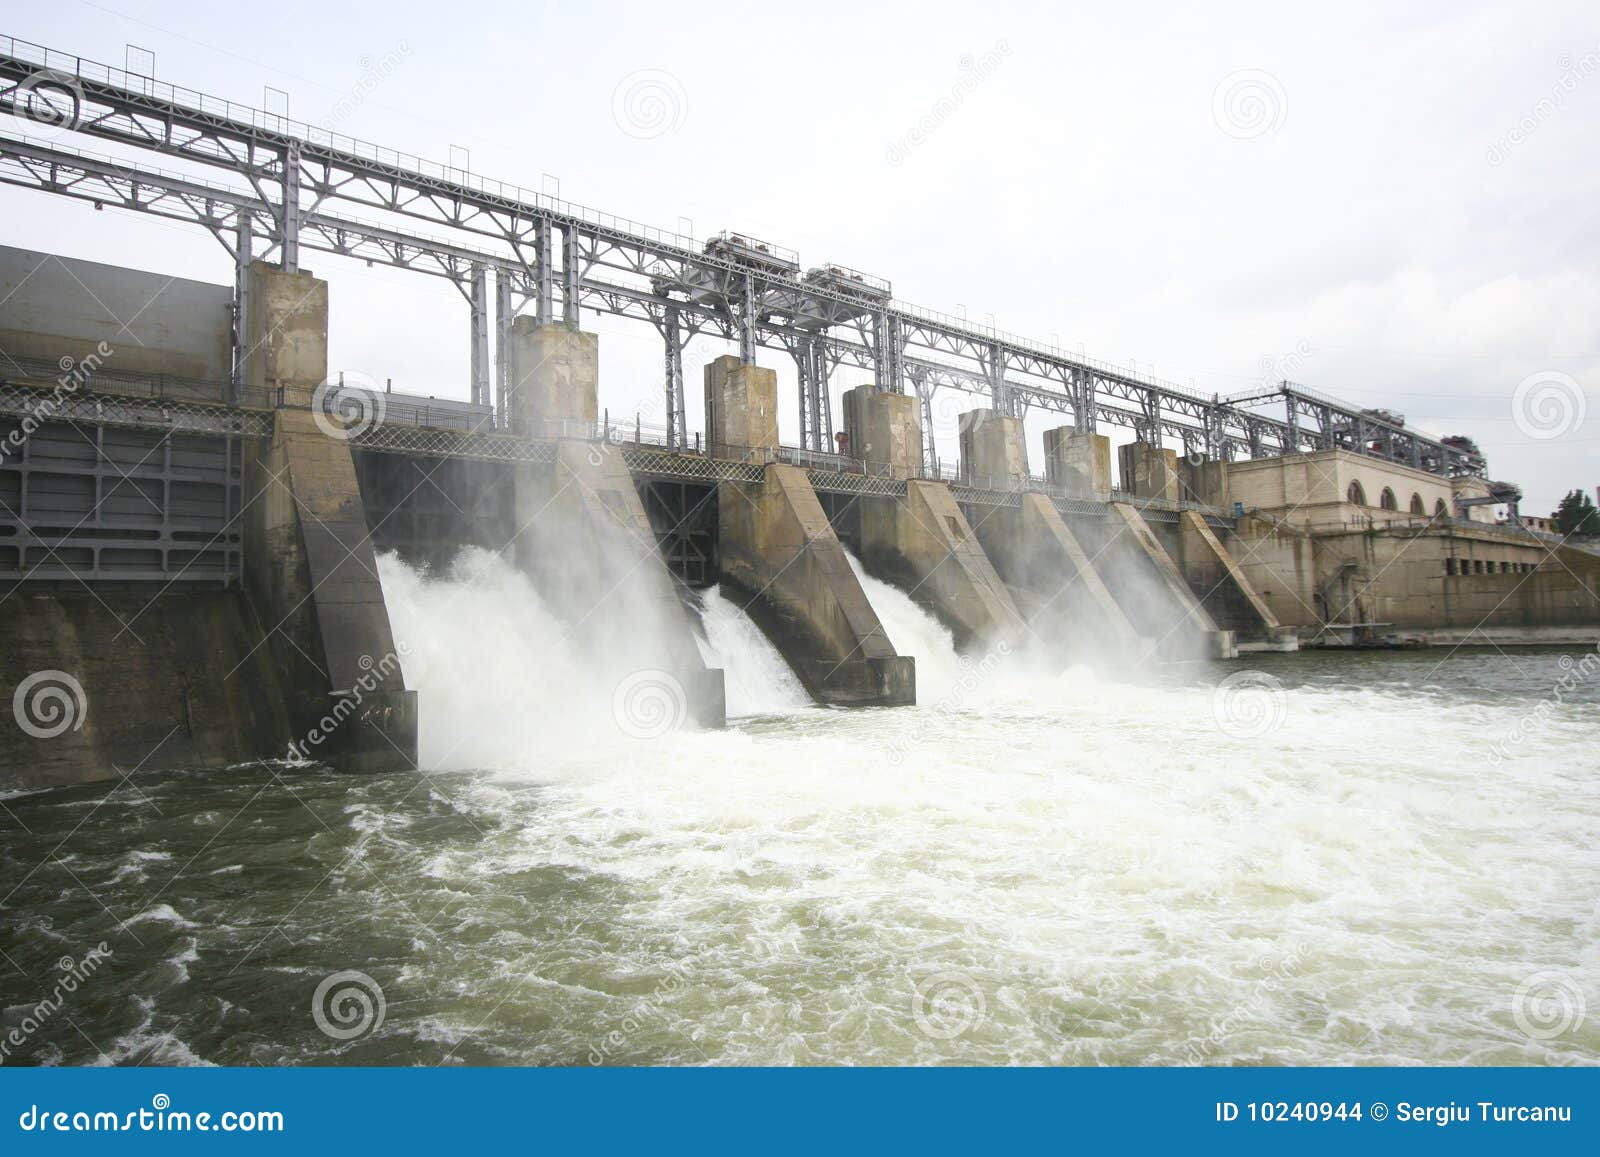 hydroelectric dam on a river